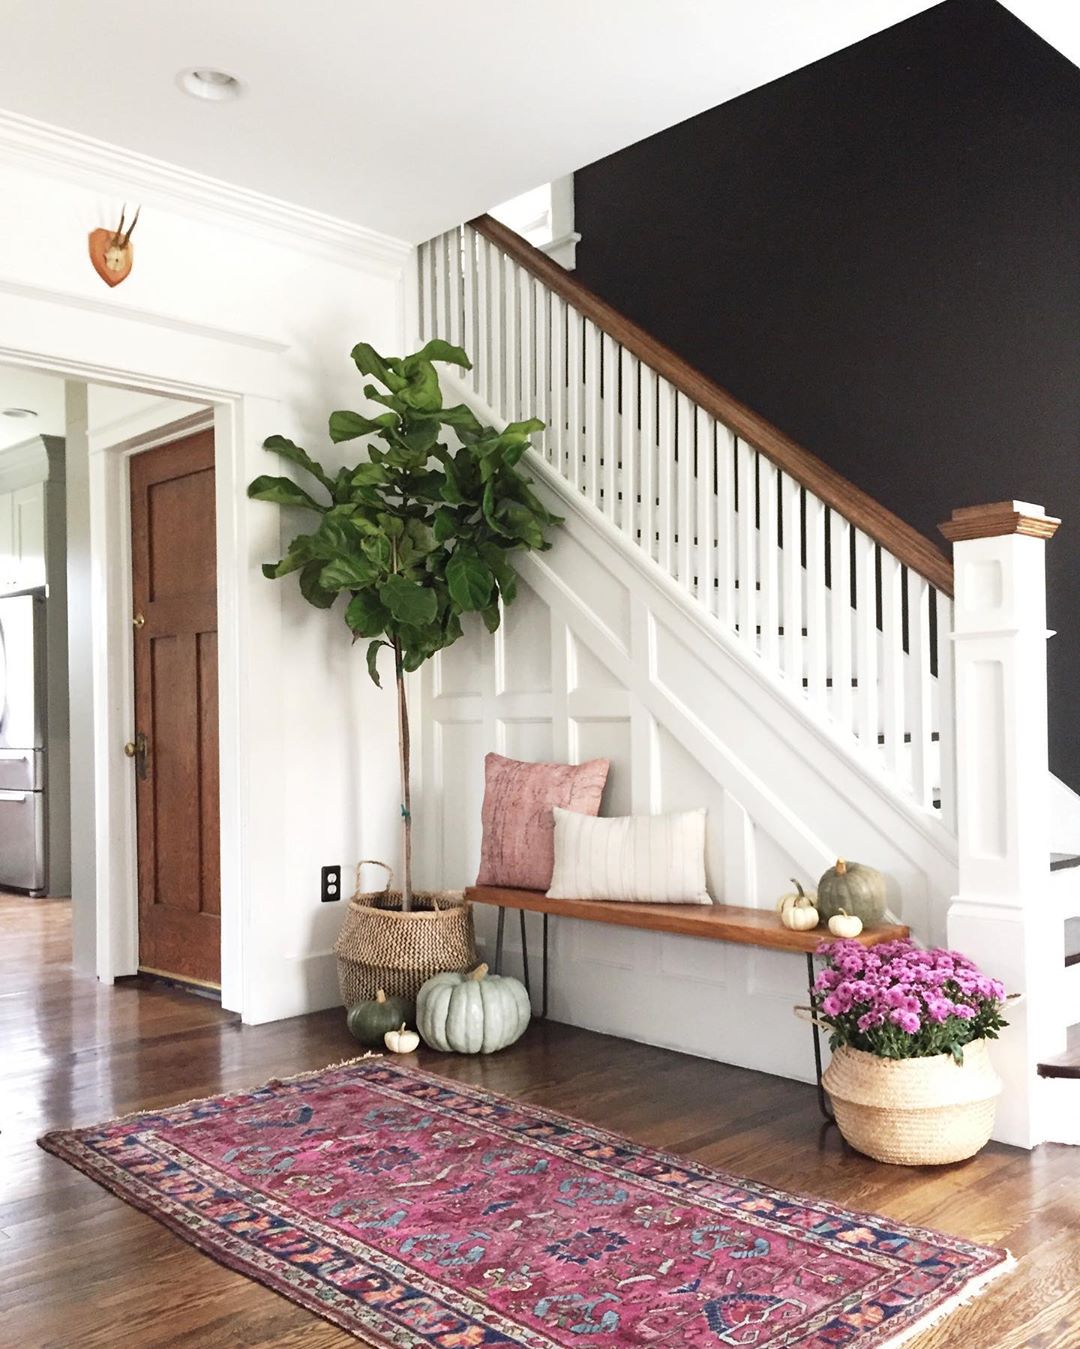 Freshly Painted Foyer with White Trim and Black Accent Wall. Photo by Instagram user @carpendaughter